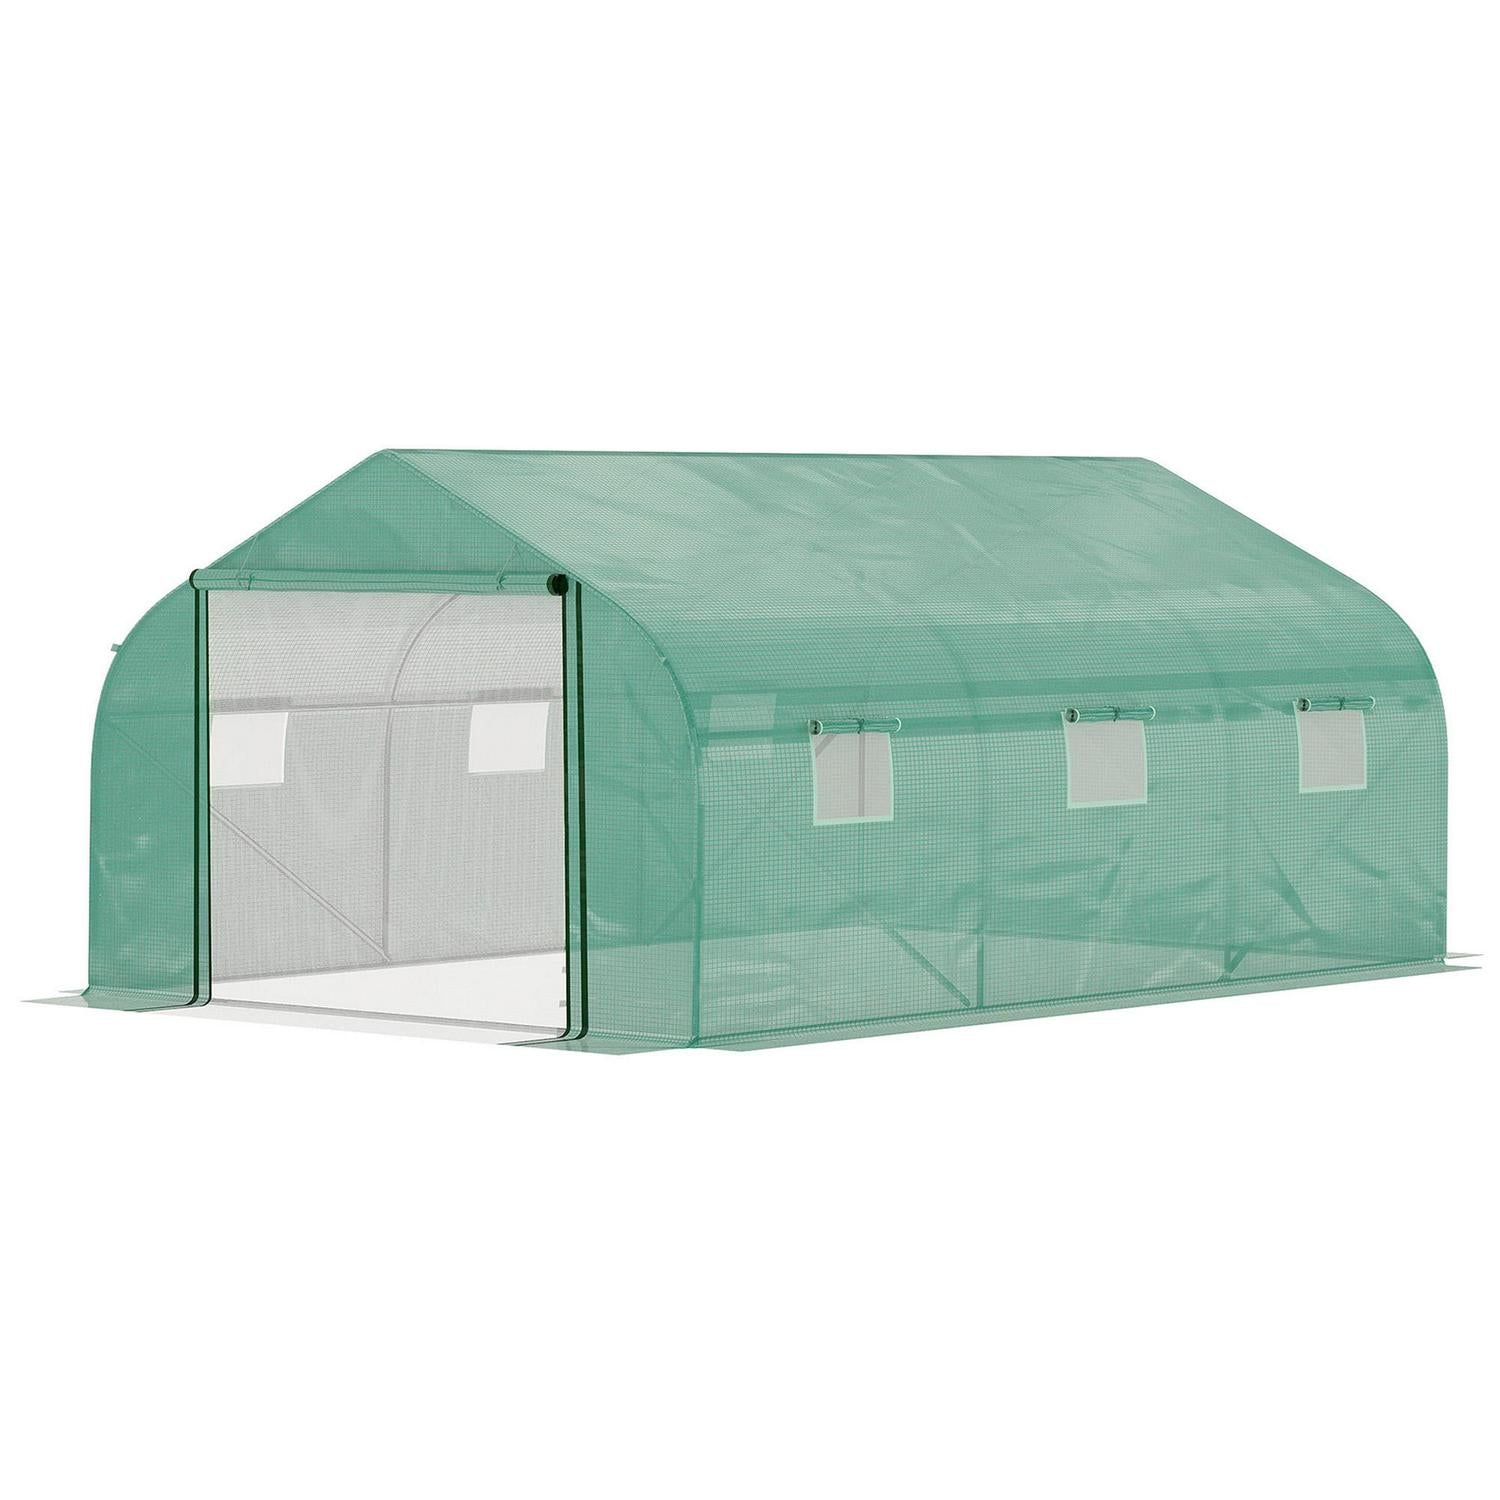 Walk-in Tunnel Greenhouse W/ Roll Up Door And 6 Windows (4.47 X 3 X 2)m